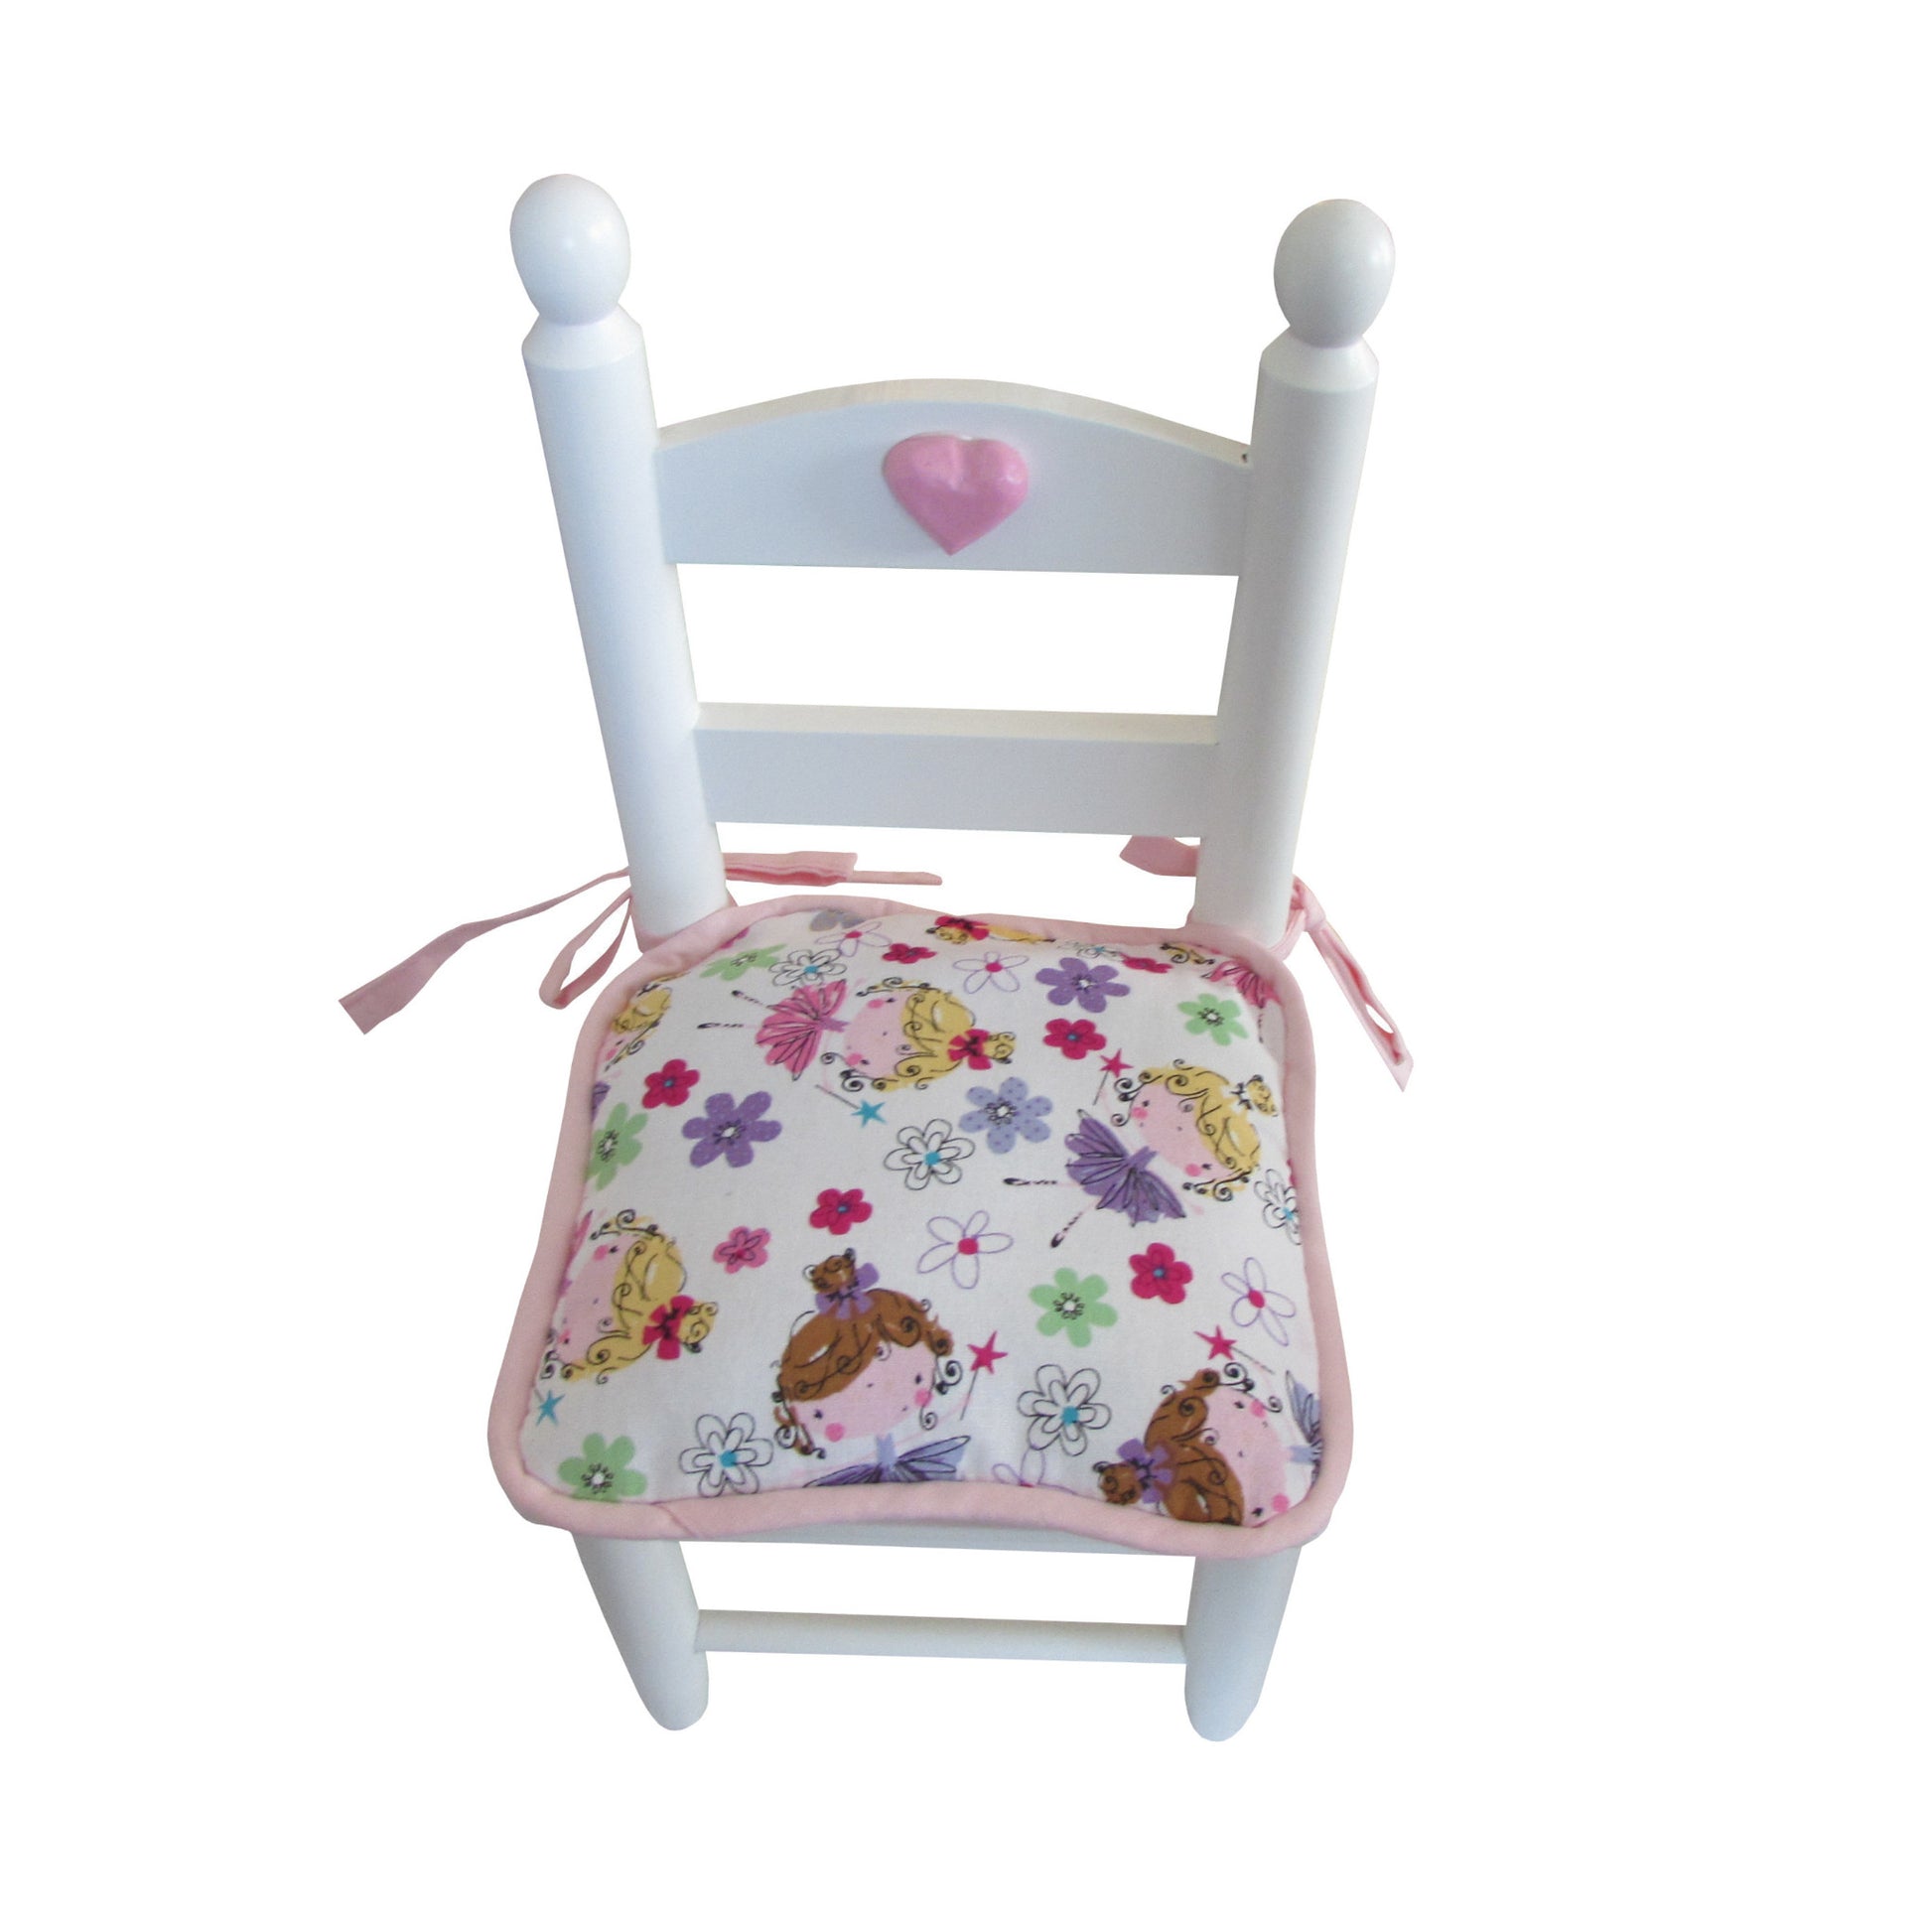 Ballerina and Flowers Print Doll Chair Cushion for 18-inch dolls Second view